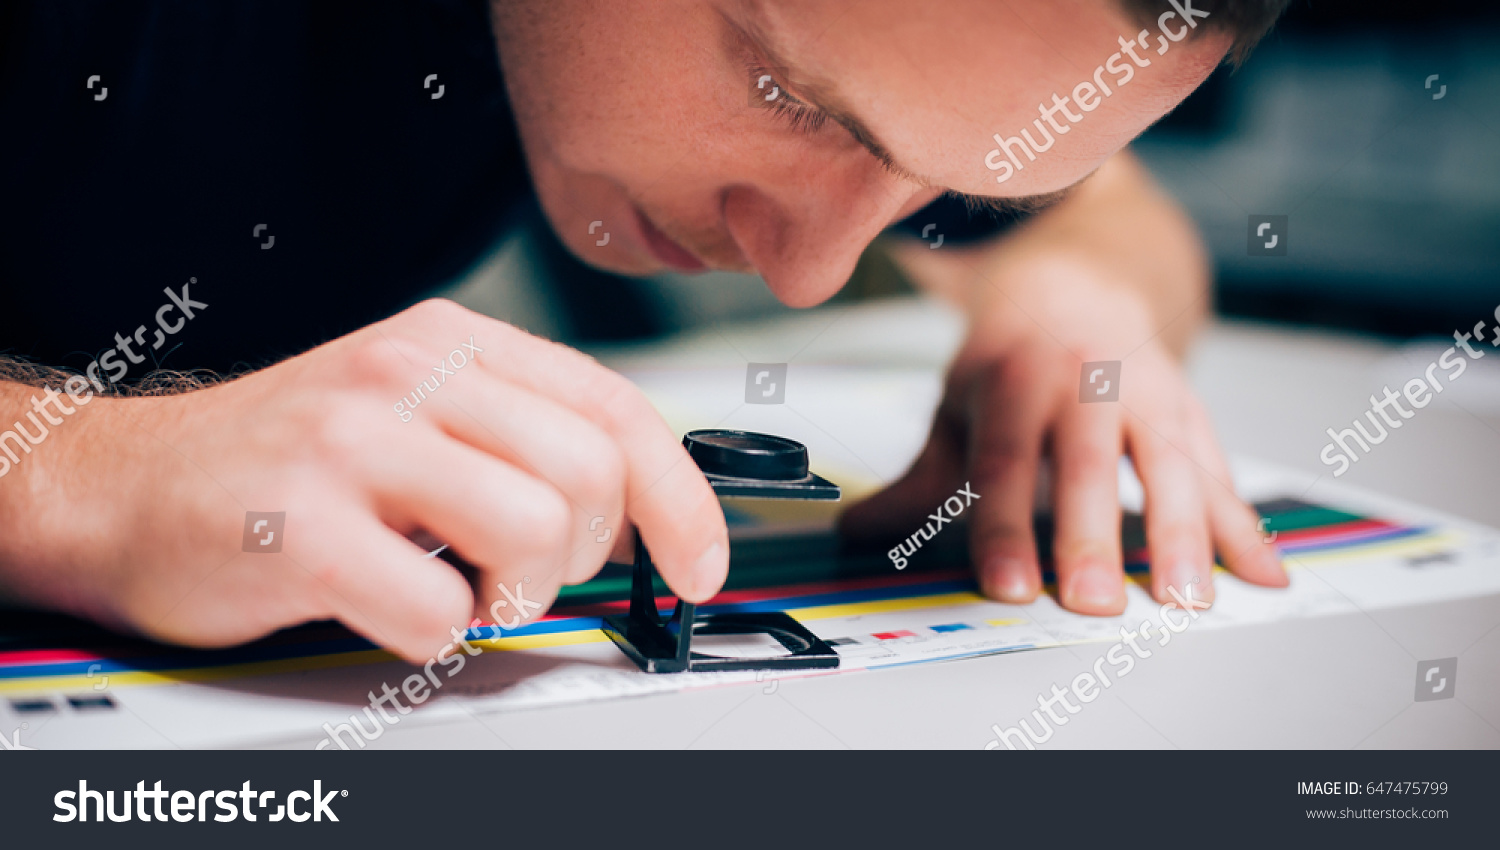 Worker in a printing and press centar uses a magnifying glass and check the print quality #647475799